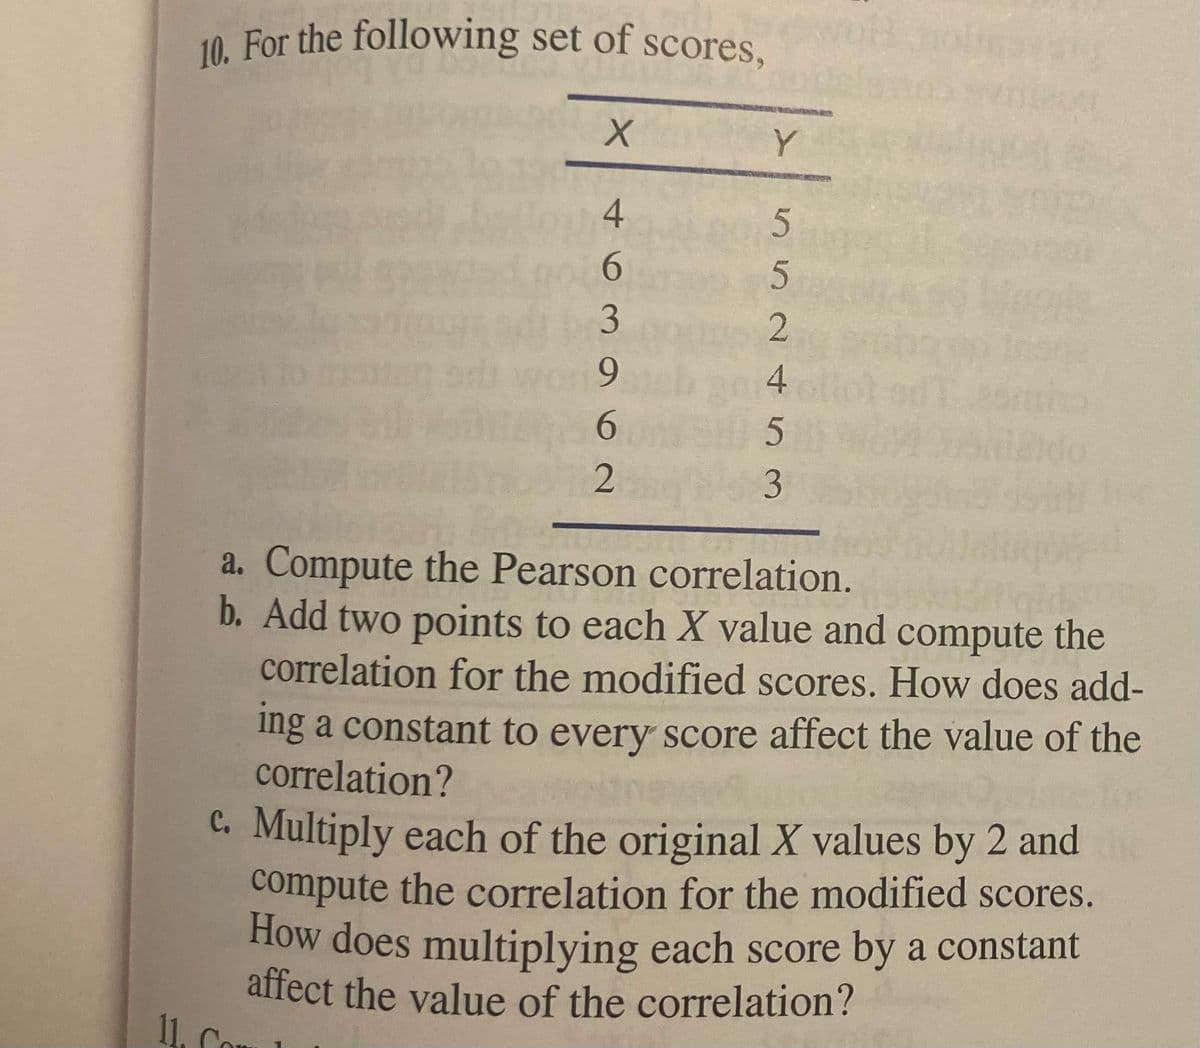 10. For the following set of scores,
Y
9.
6.
a. Compute the Pearson correlation.
b. Add two points to each X value and compute the
correlation for the modified scores. How does add-
ing a constant to every score affect the value of the
correlation?
hone
C. Multiply each of the original X values by 2 and
compute the correlation for the modified scores.
How does multiplying each score by a constant
affect the value of the correlation?
11. Co
552 452
463
